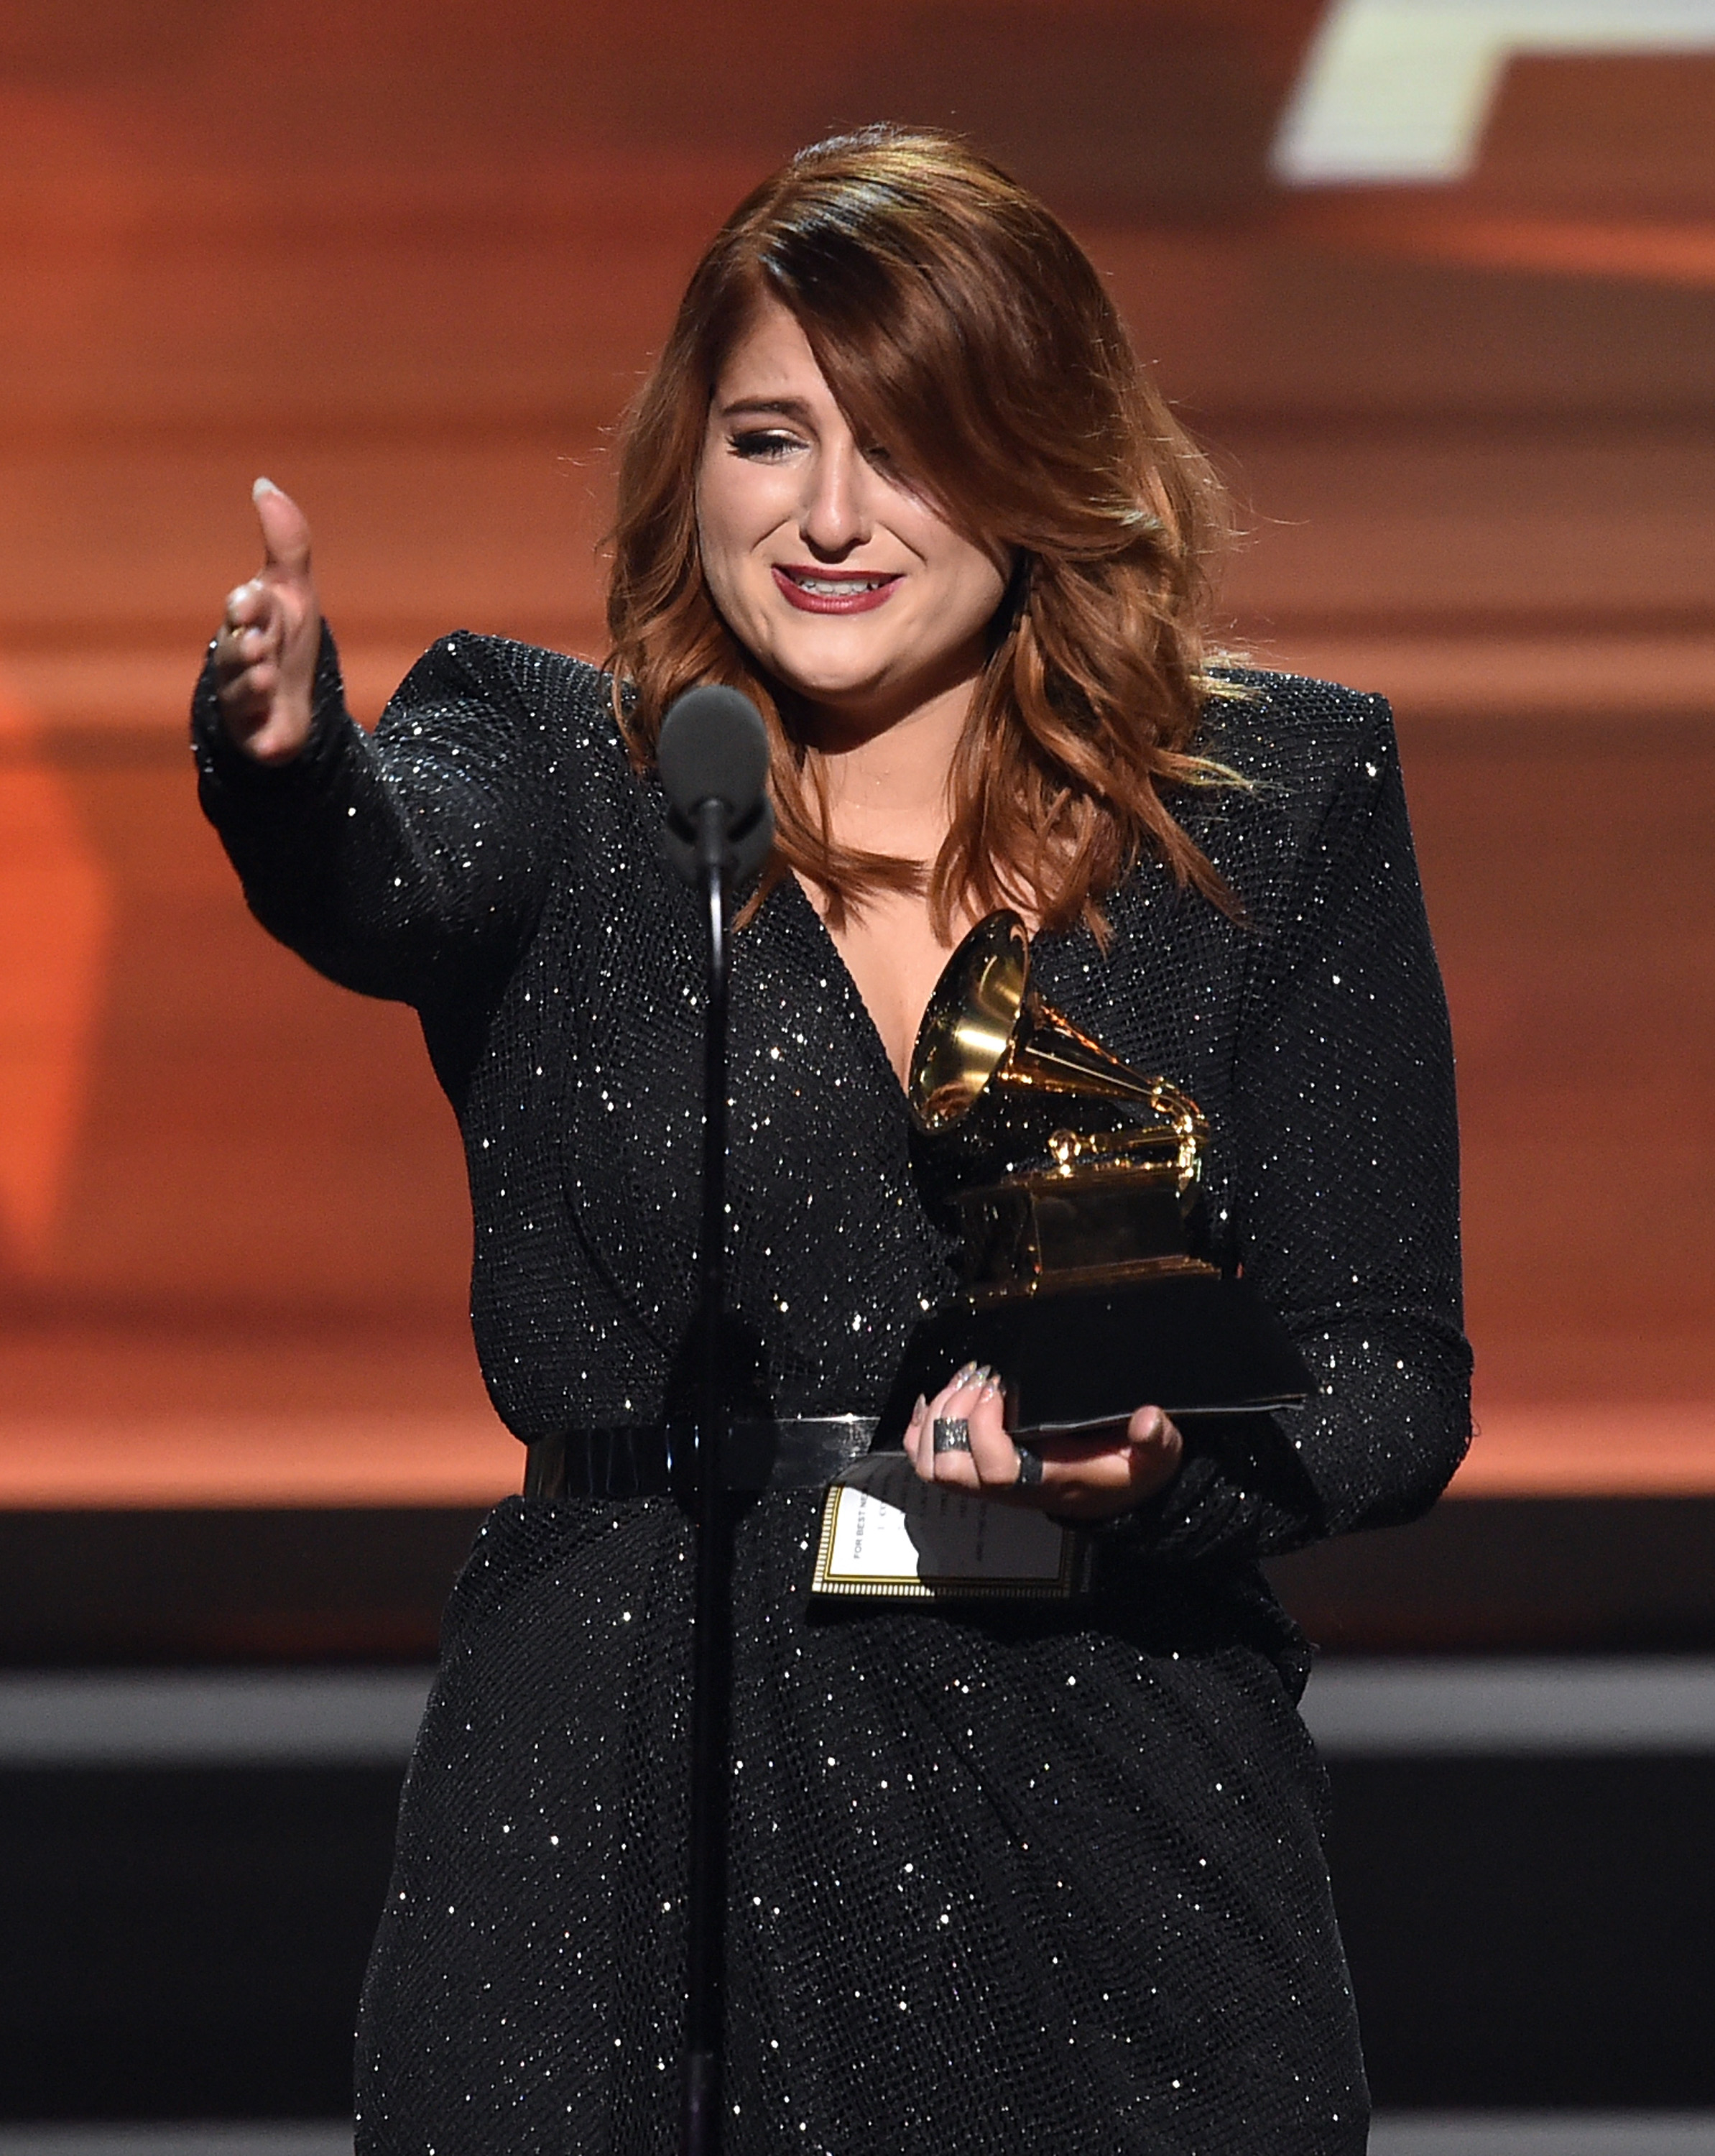 Meghan Trainor accepting her Grammy